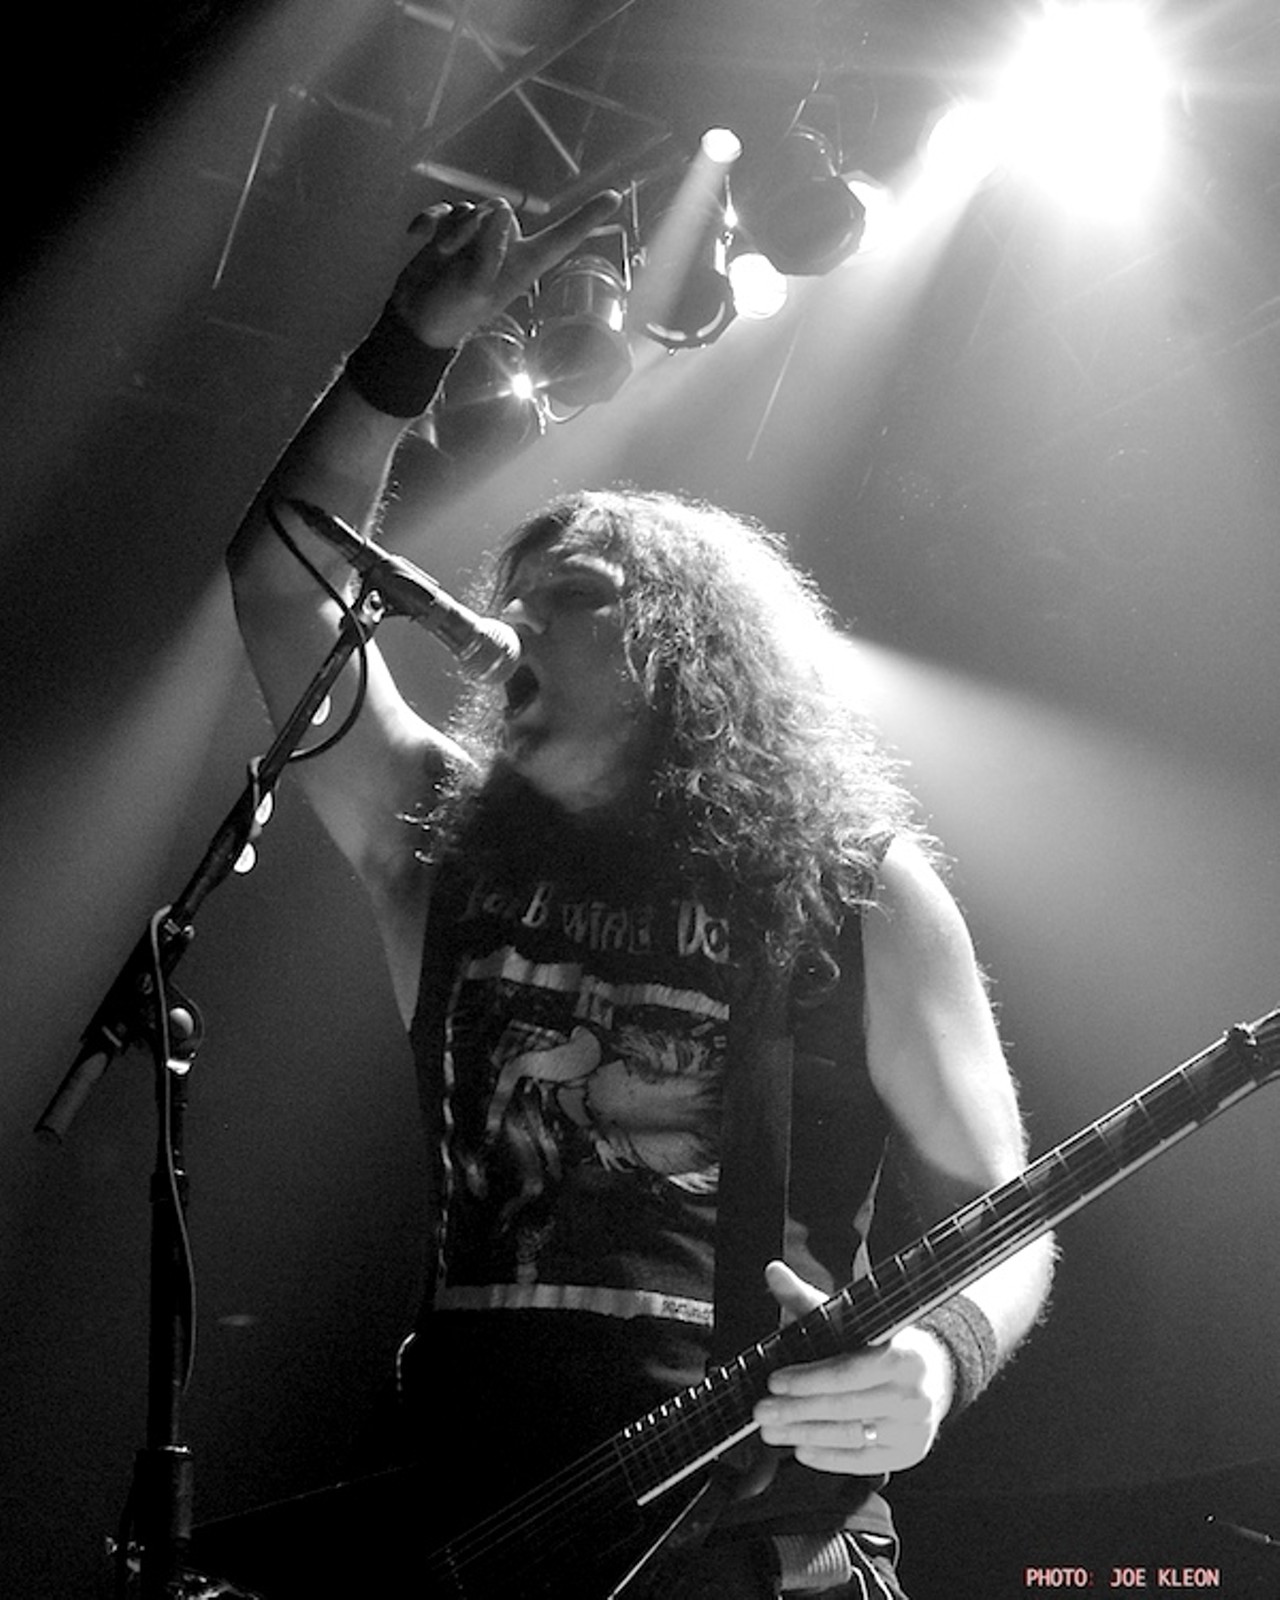 Kreator and Arch Enemy Performing at House of Blues